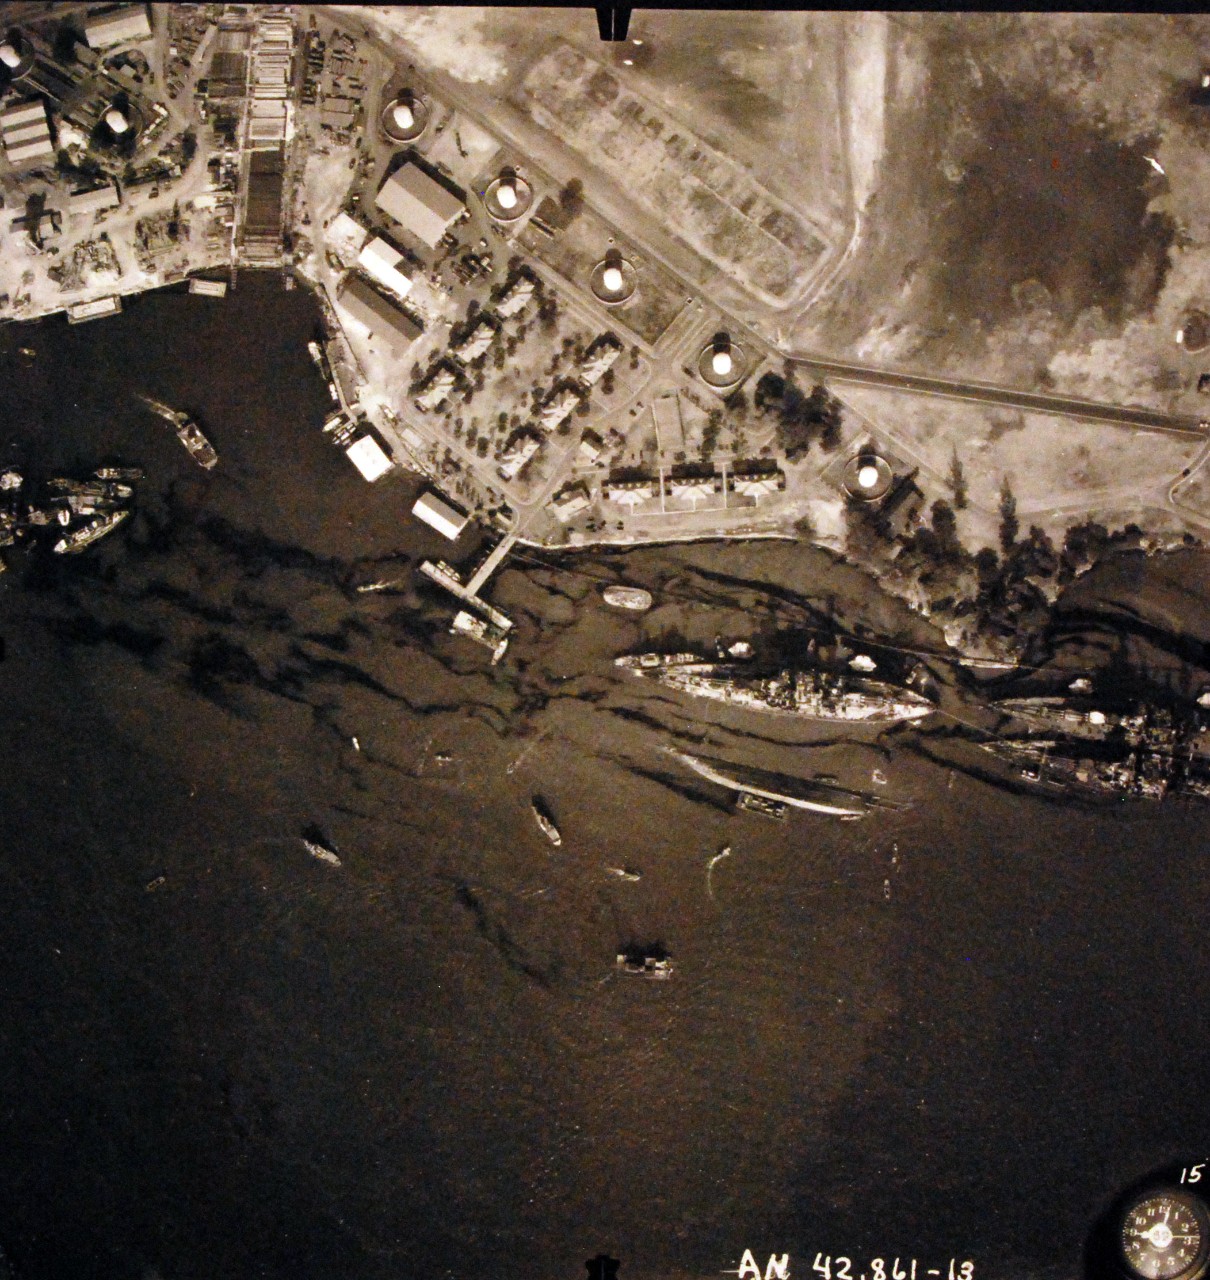 80-G-387574:  Pearl Harbor Attack, 7 December 1941.  Aerial view of "Battleship Row" moorings on the southern side of Ford Island, 10 December 1941, showing damage from the Japanese raid three days earlier.  Diagonally, from left center to lower right are: USS Maryland (BB-46), lightly damaged, with the capsized USS Oklahoma (BB-37) outboard. A barge is alongside Oklahoma, supporting rescue efforts. USS Tennessee (BB-43), lightly damaged, with the sunken USS West Virginia (BB-48) outboard. Note dark oil streaks on the harbor surface, originating from the sunken battleships. Photographed by VJ-1 at an altitude of 3,000 feet and released November 9, 1950. U.S. Navy photograph, now in the collections of the National Archives.       (9/22/2015).